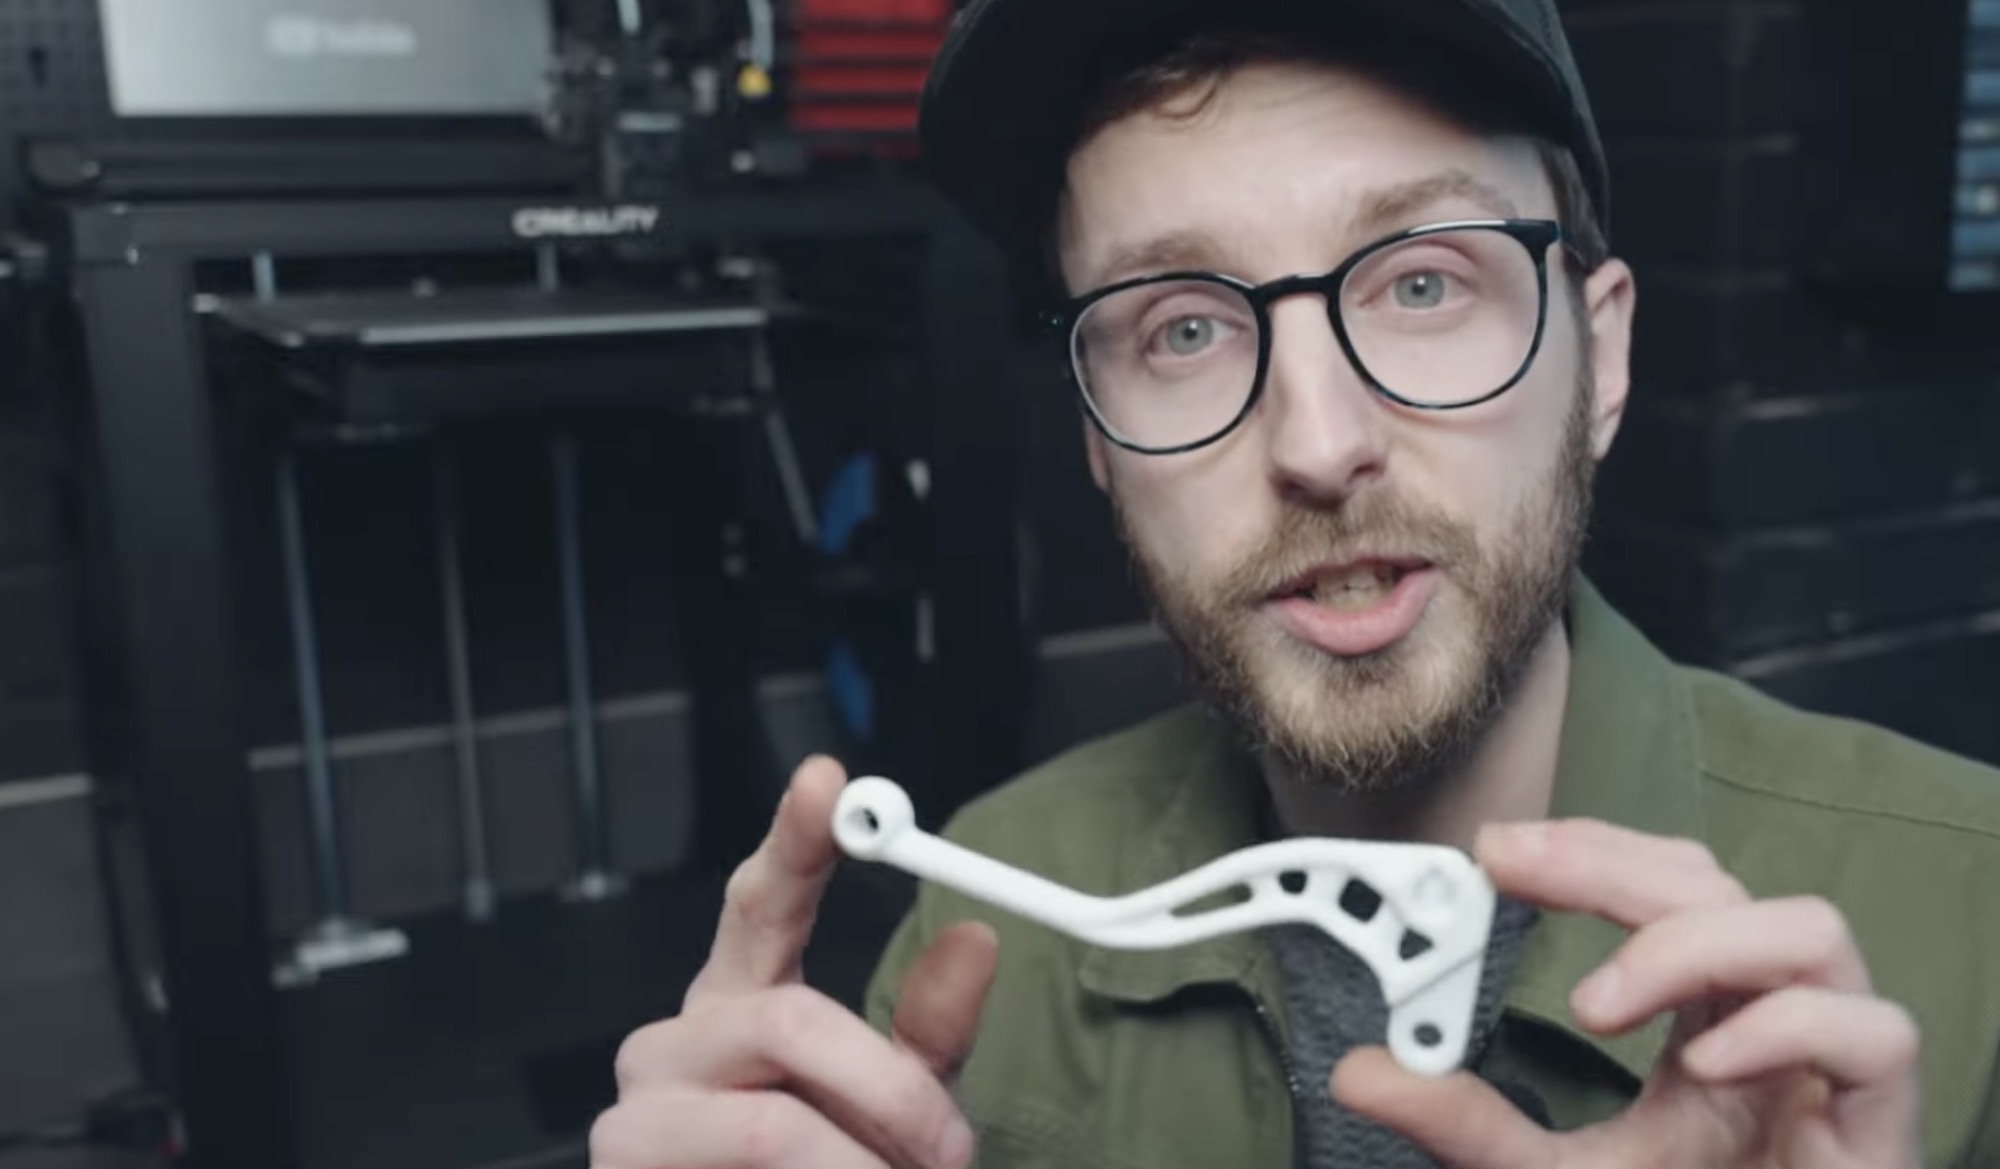 Youtuber Jish on his new Creality Ender-5 S1, which is used to create motorcycle parts for build projects. Media sourced from Jish's video, all relevant rights reserved.